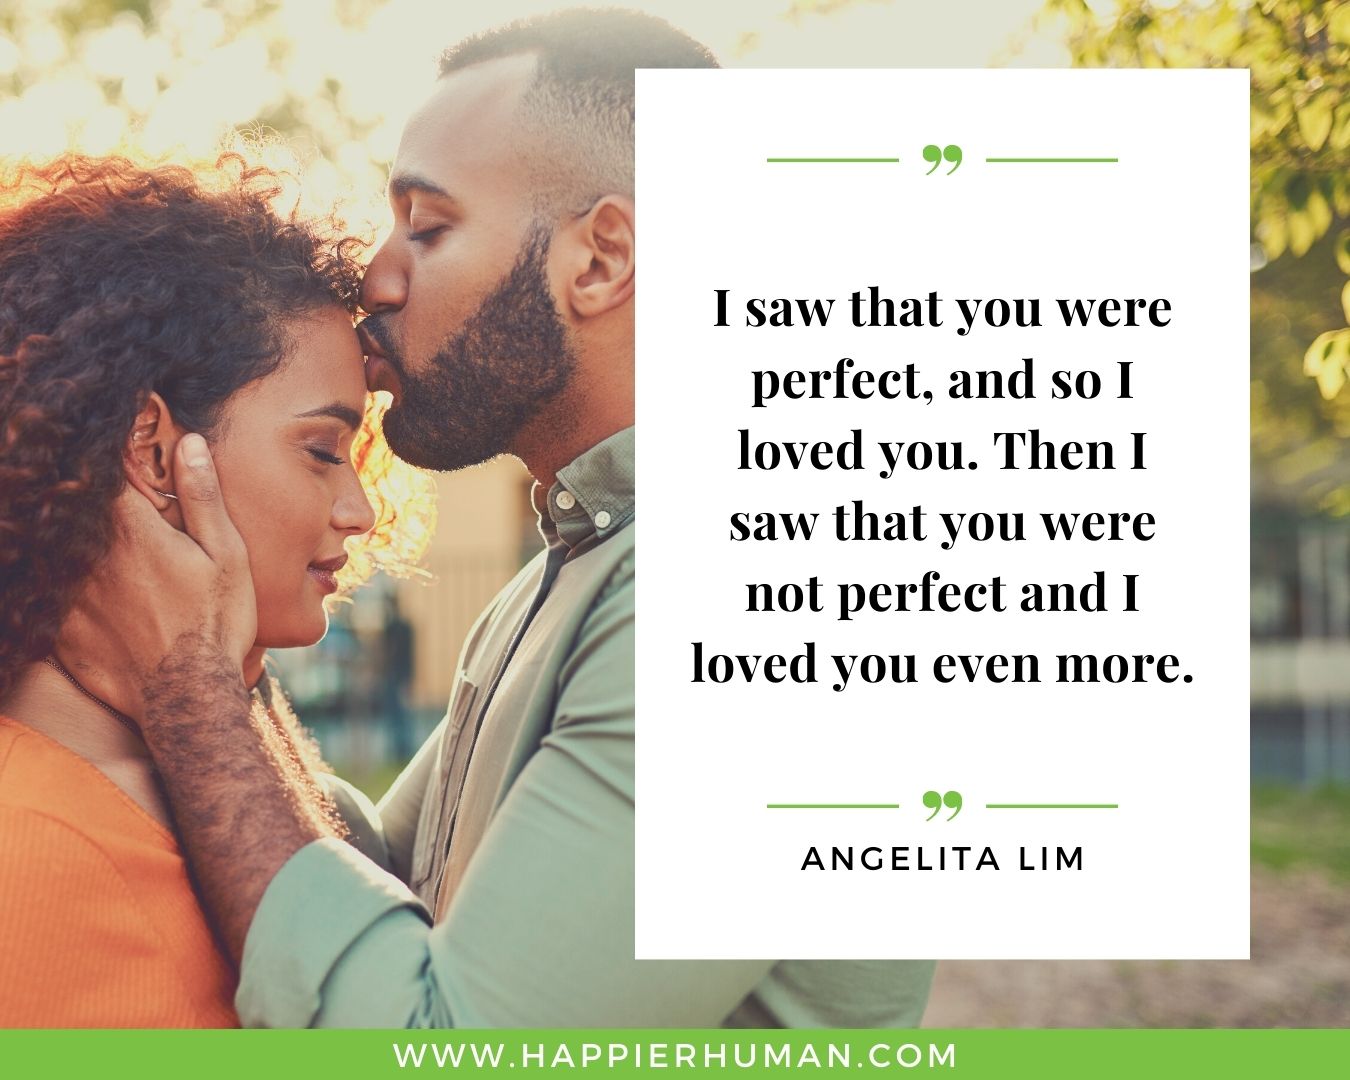 Perfect love quotes for women - “I saw that you were perfect, and so I loved you. Then I saw that you were not perfect and I loved you even more.” – Angelita Lim